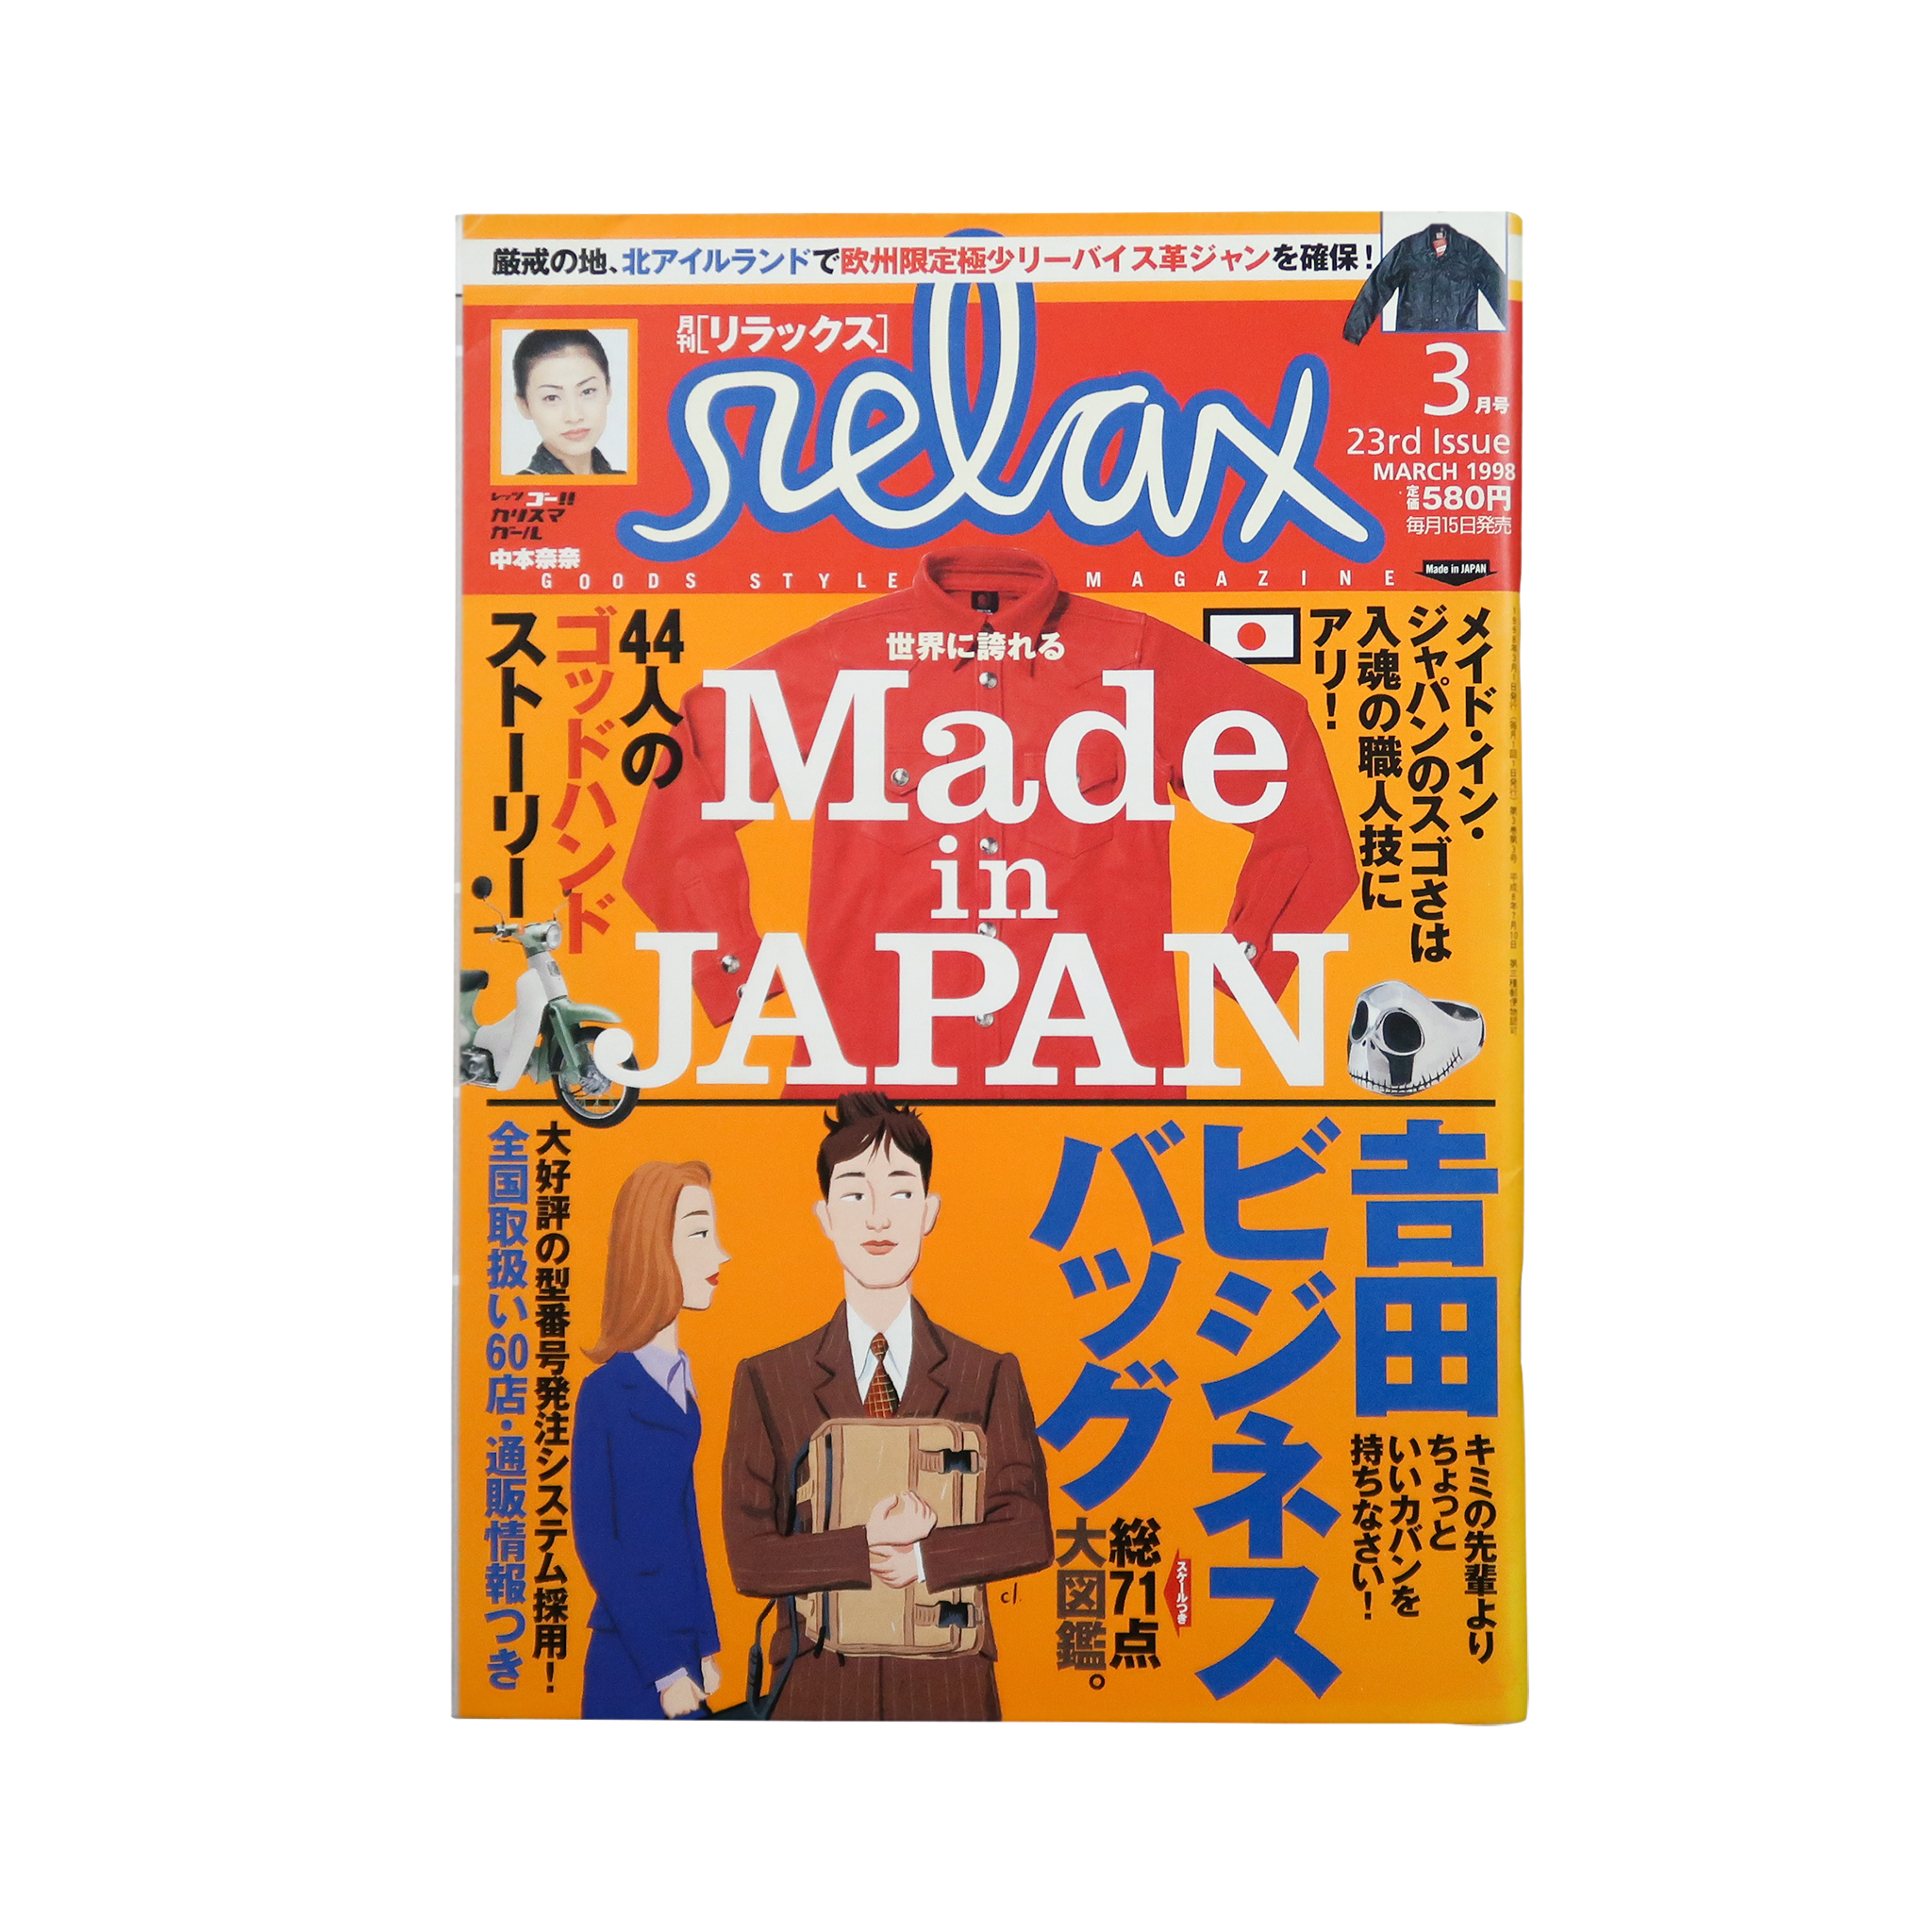 #23 'Made in Japan' Issue (1998)